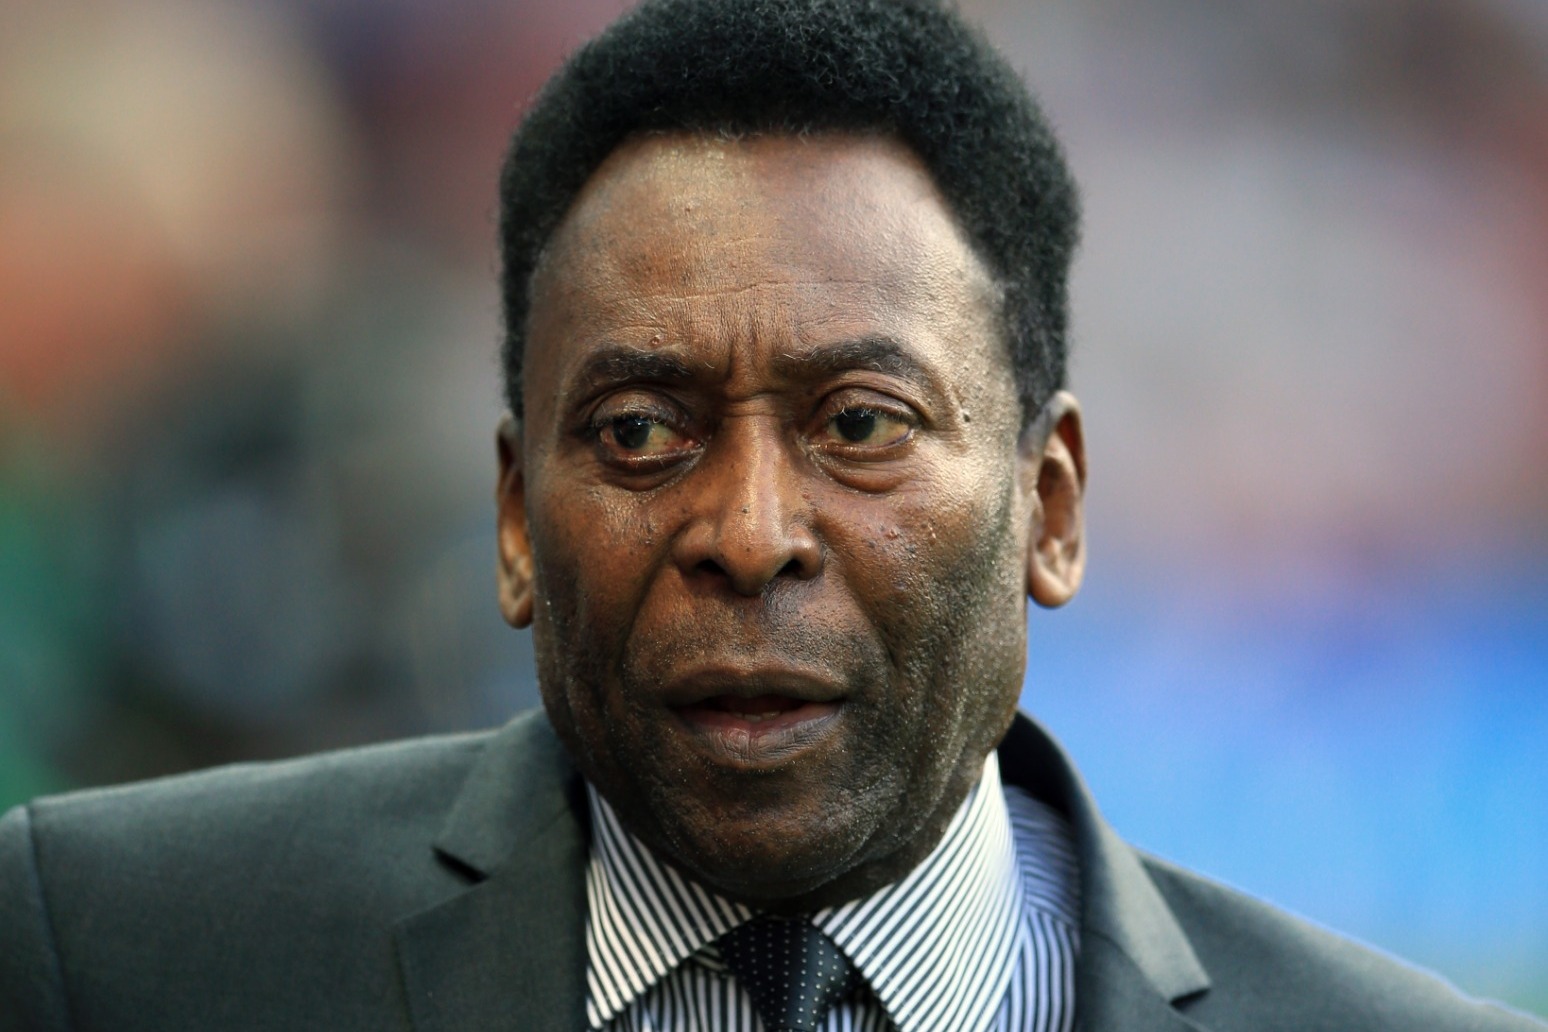 Pele thanks hospital staff after returning home following surgery 